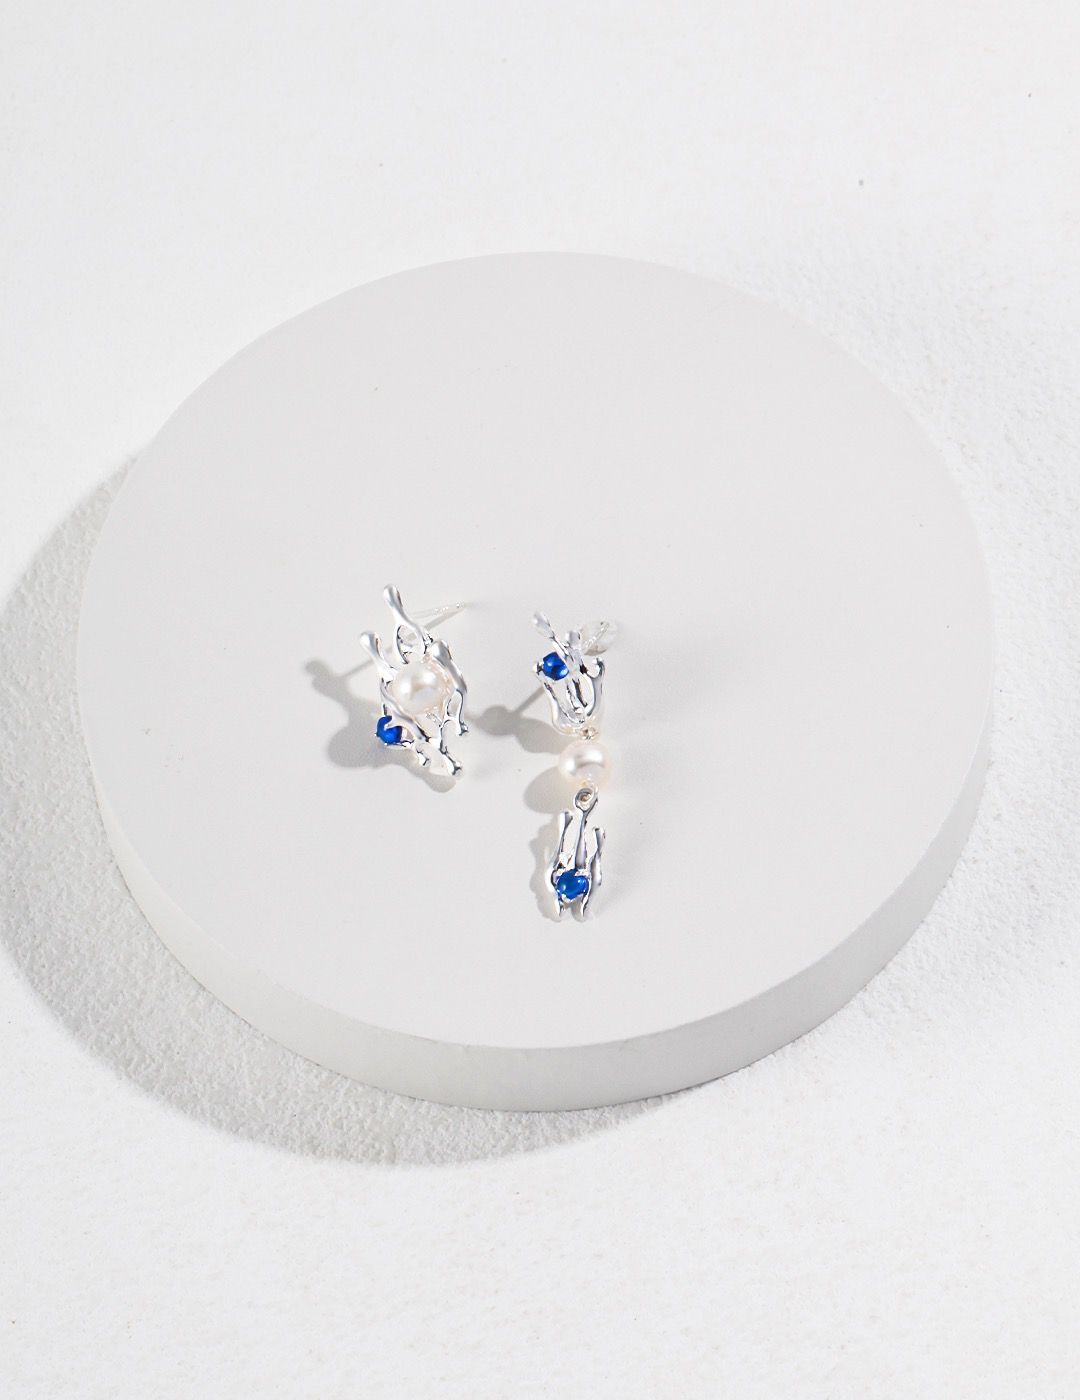 Elevate your style with our Sapphire and Silver Teardrop Earrings. Crafted from high-quality sterling silver and featuring brilliant sapphire gemstones, these earrings offer a timeless elegance that complements any outfit.